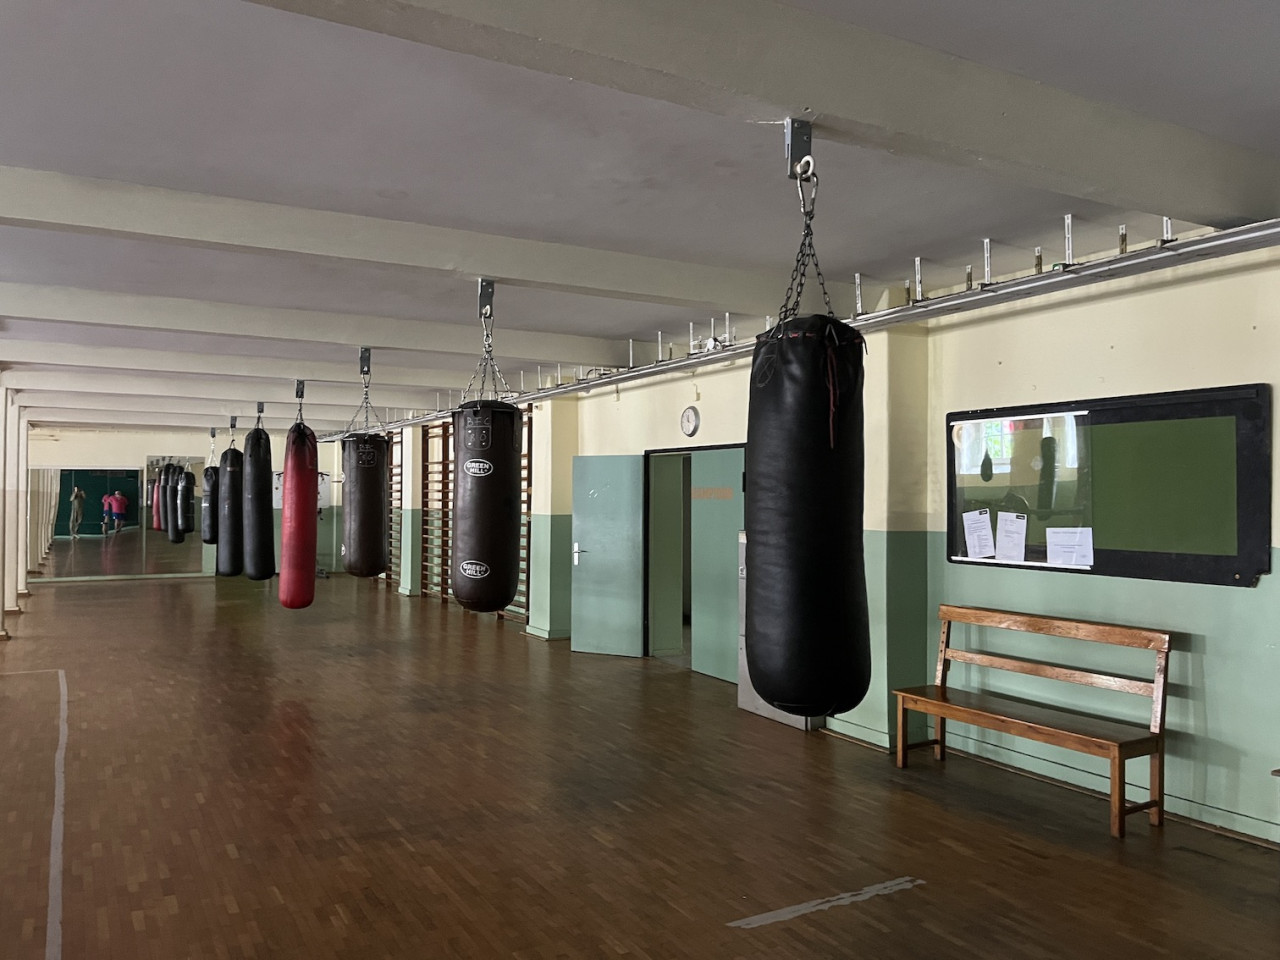 plush74 location film photo event germany berlin vintage gym fitness boxing 171